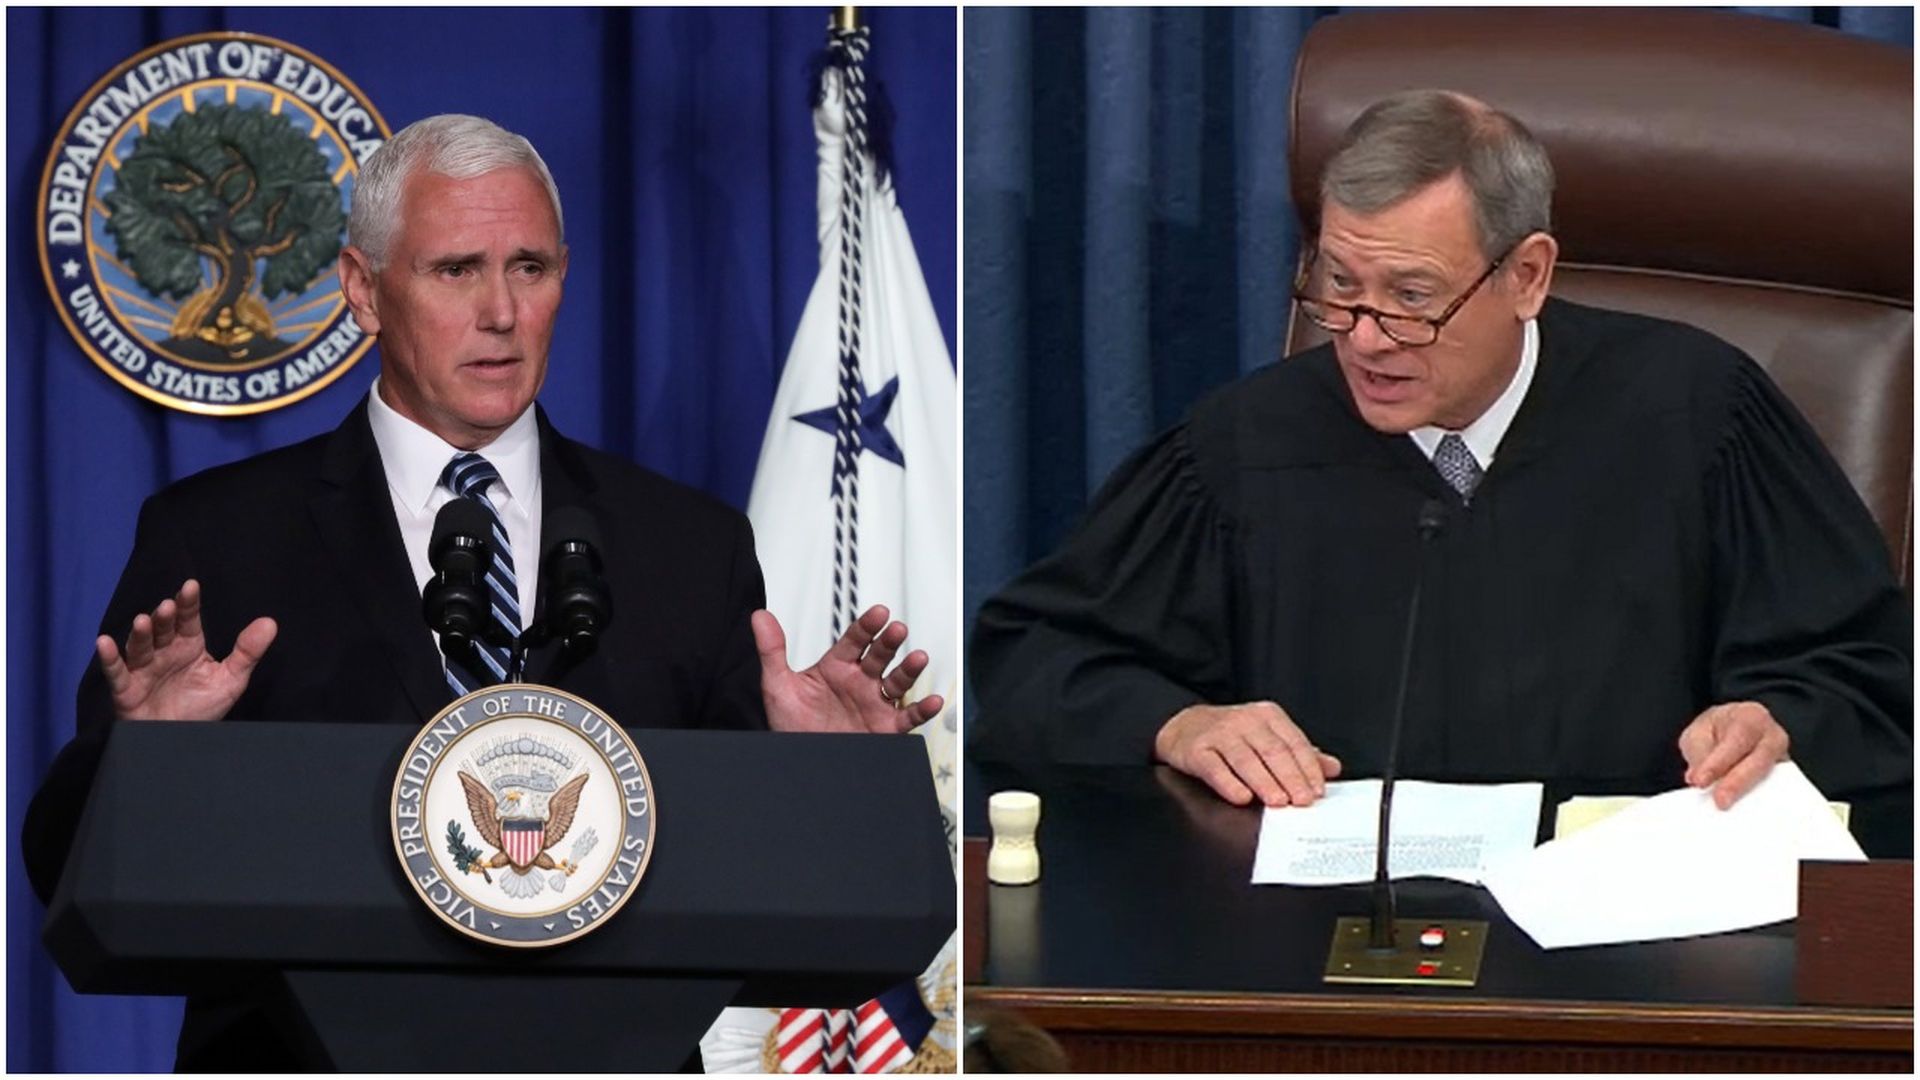 Combination images of Vice President Mike Pence and Chief Justice John Roberts.